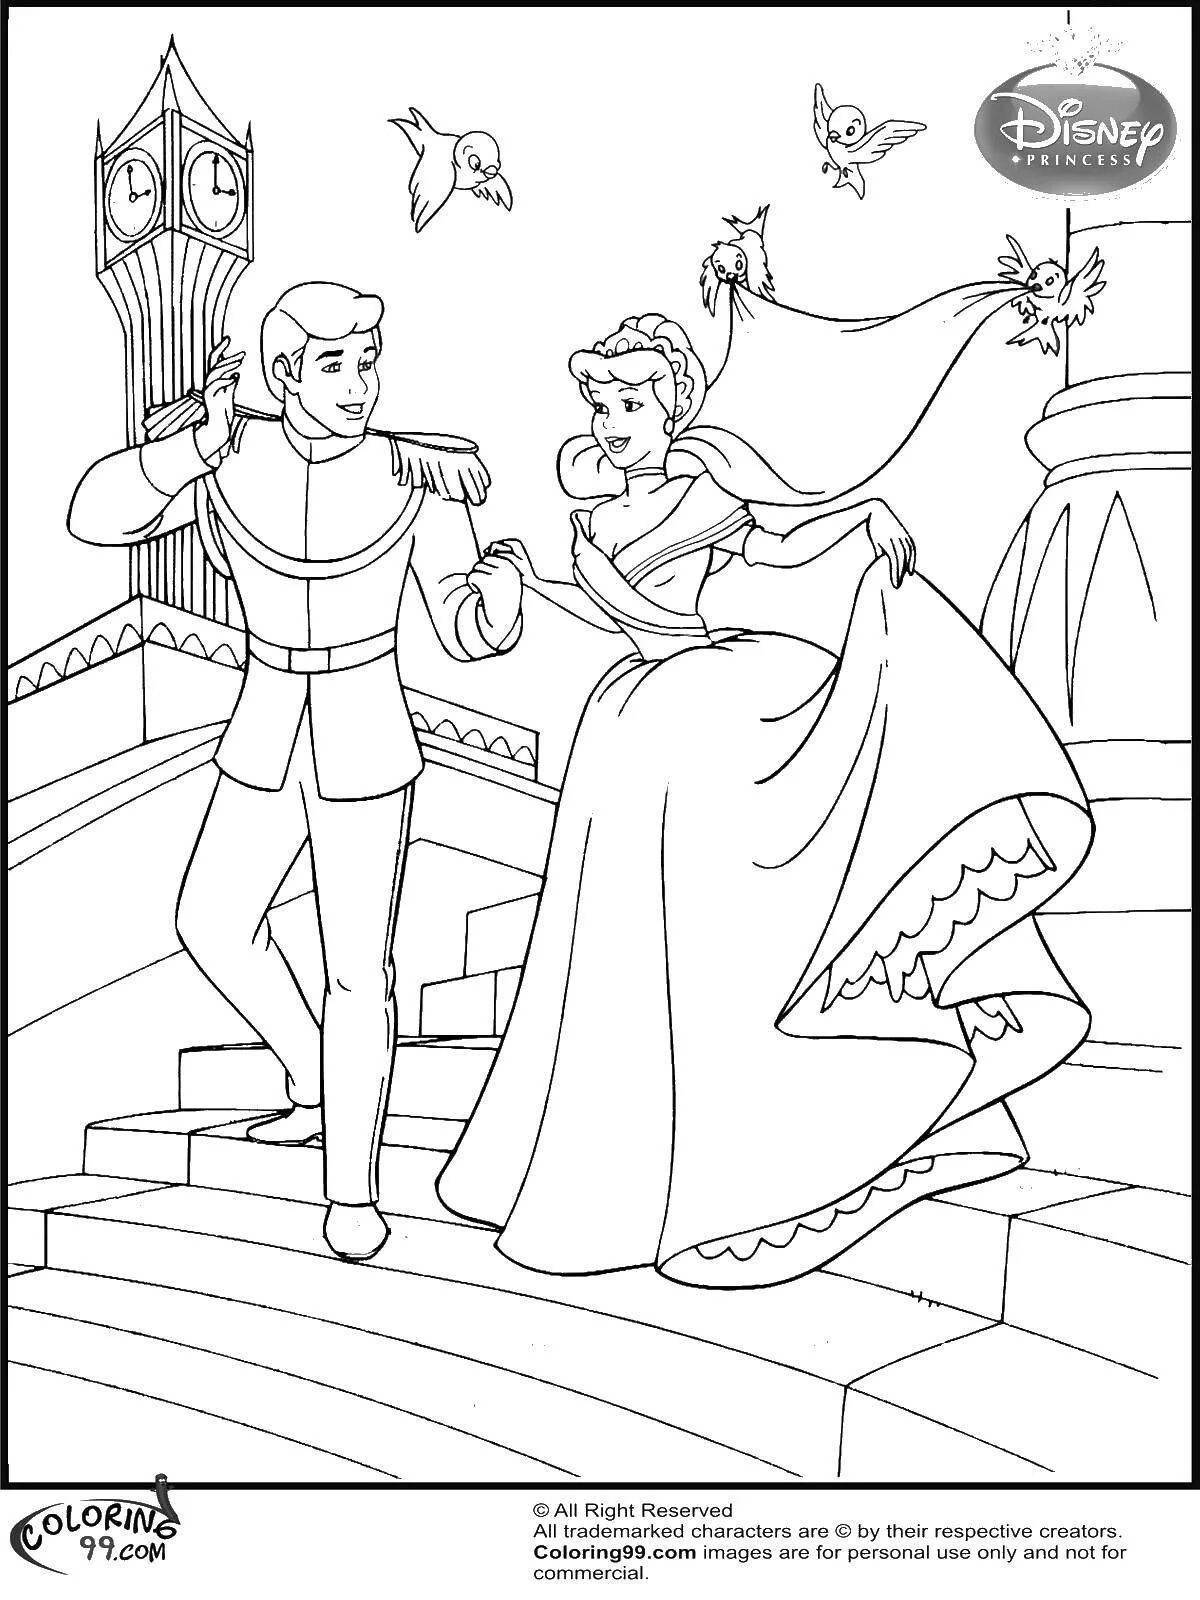 Impeccable princess and king coloring